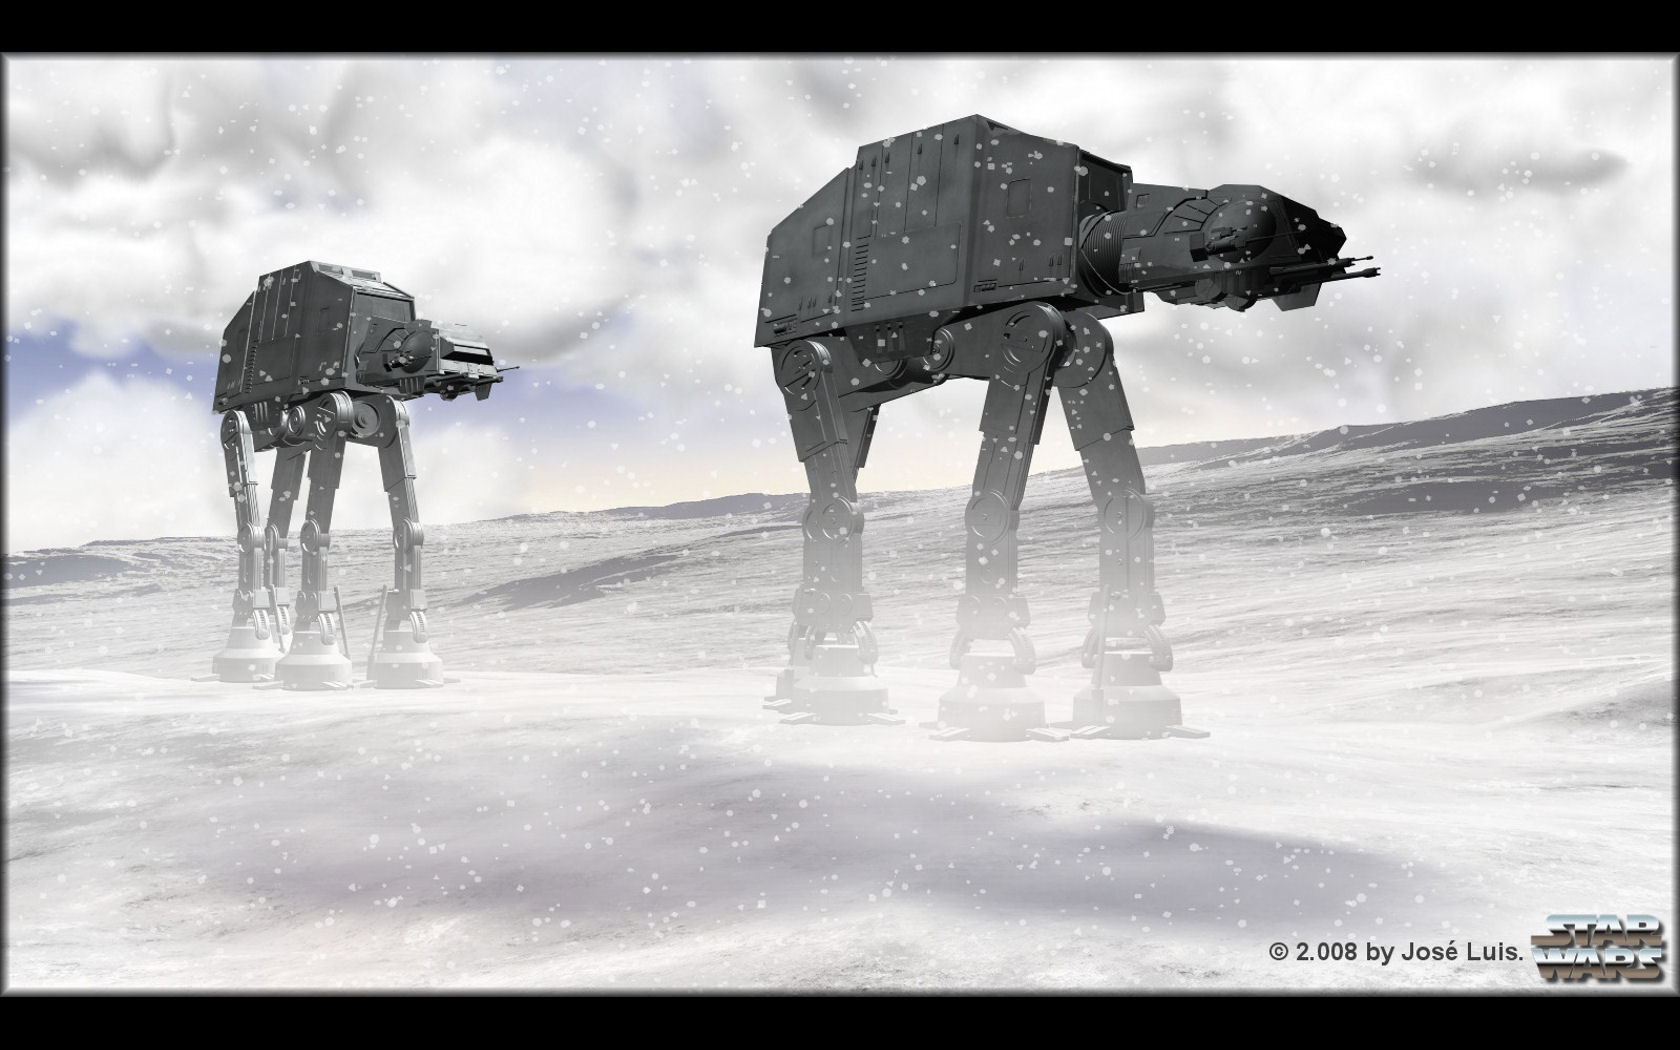 STAR WARS Wallpaper Set 2 Awesome Wallpapers 1680x1050